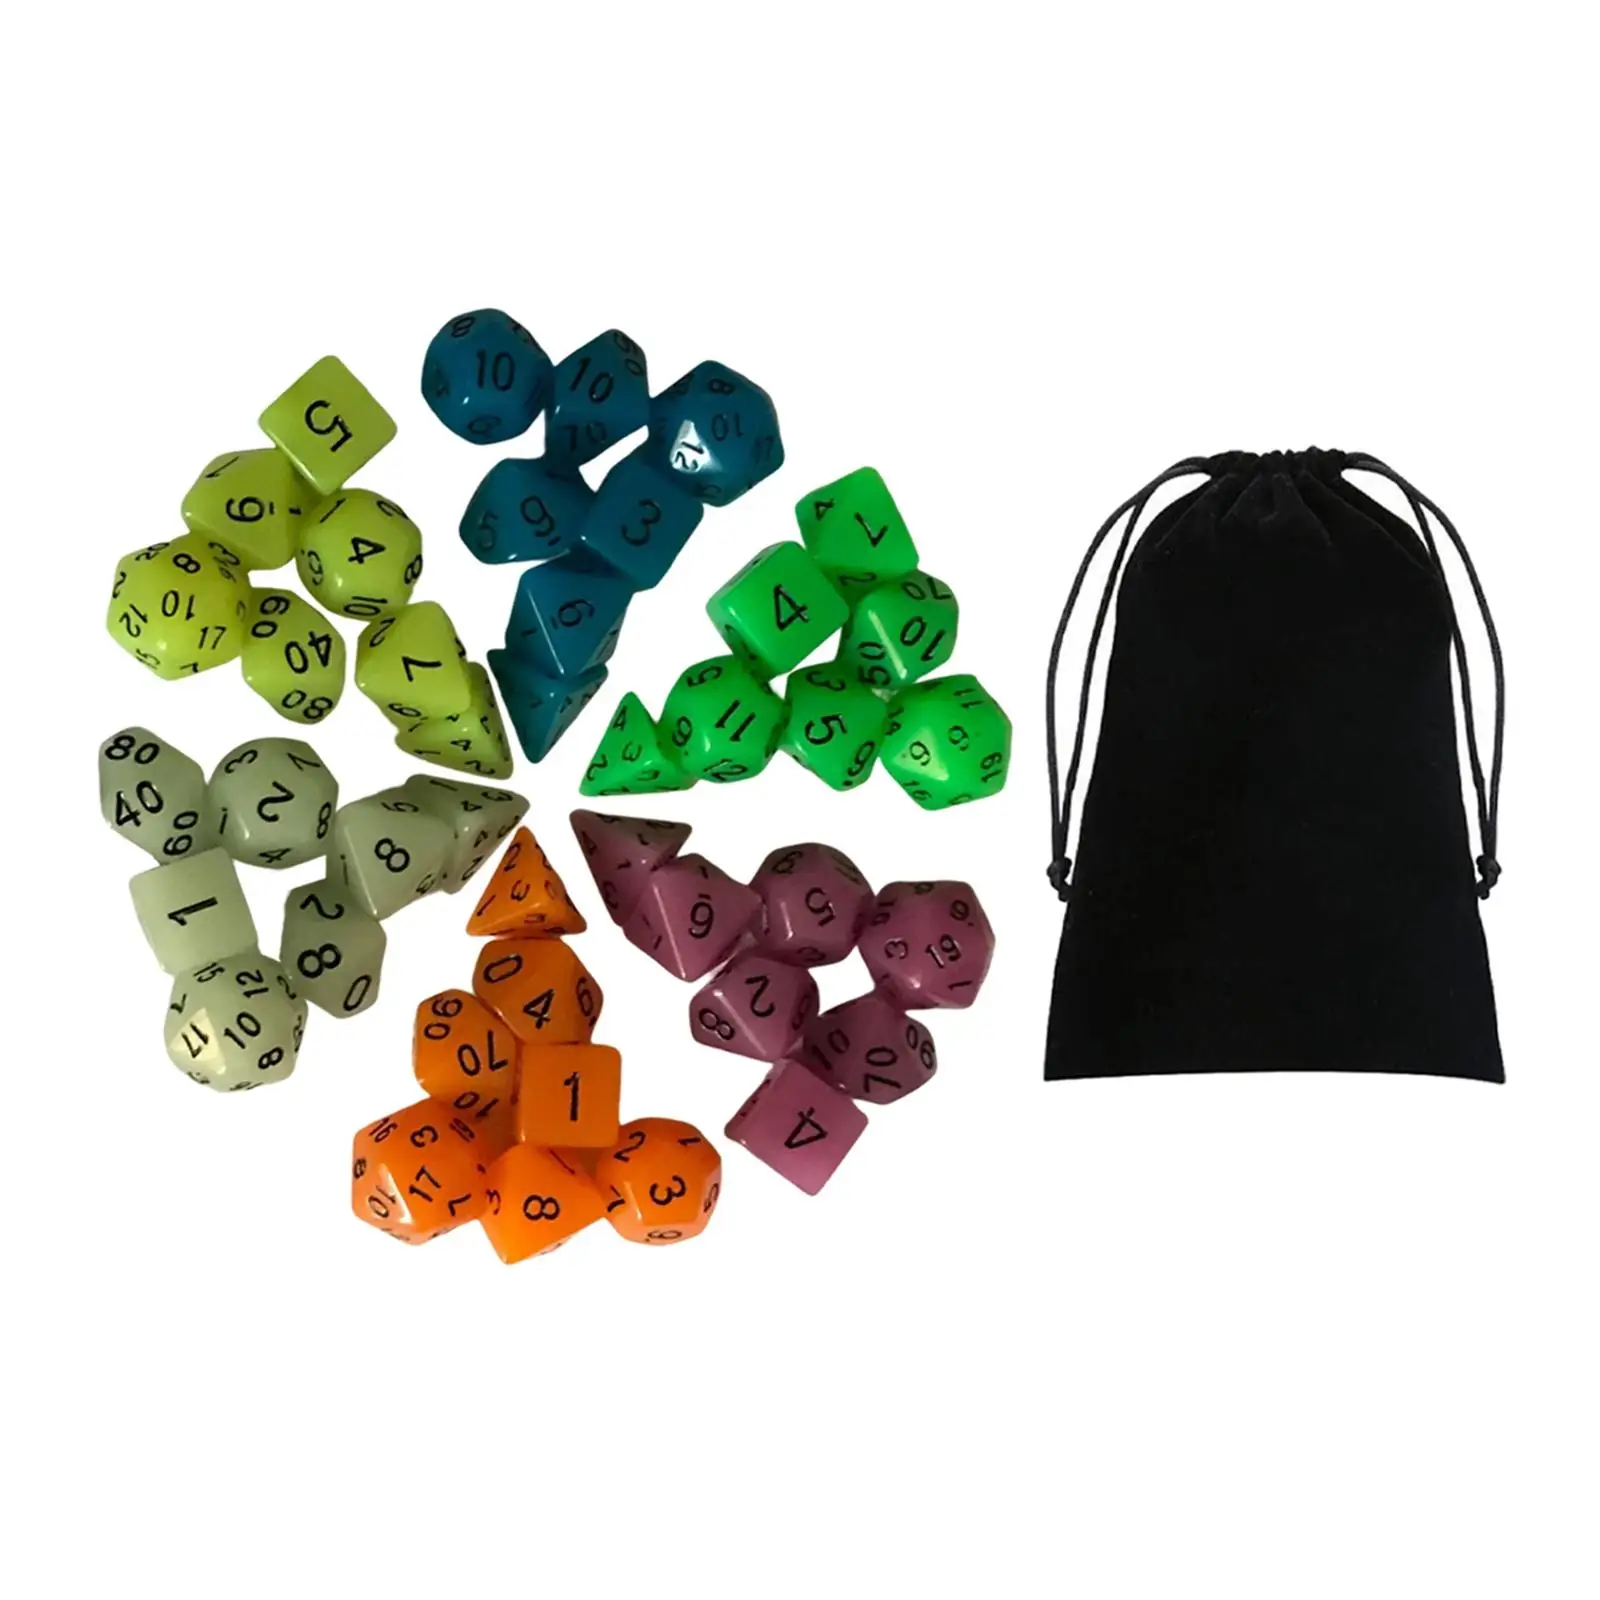 Acrylic Luminous RPG Set D4-D20 Bar Toys Glowing Polyhedral Dices Set for DND Role Playing RPG Board Game Math Teaching